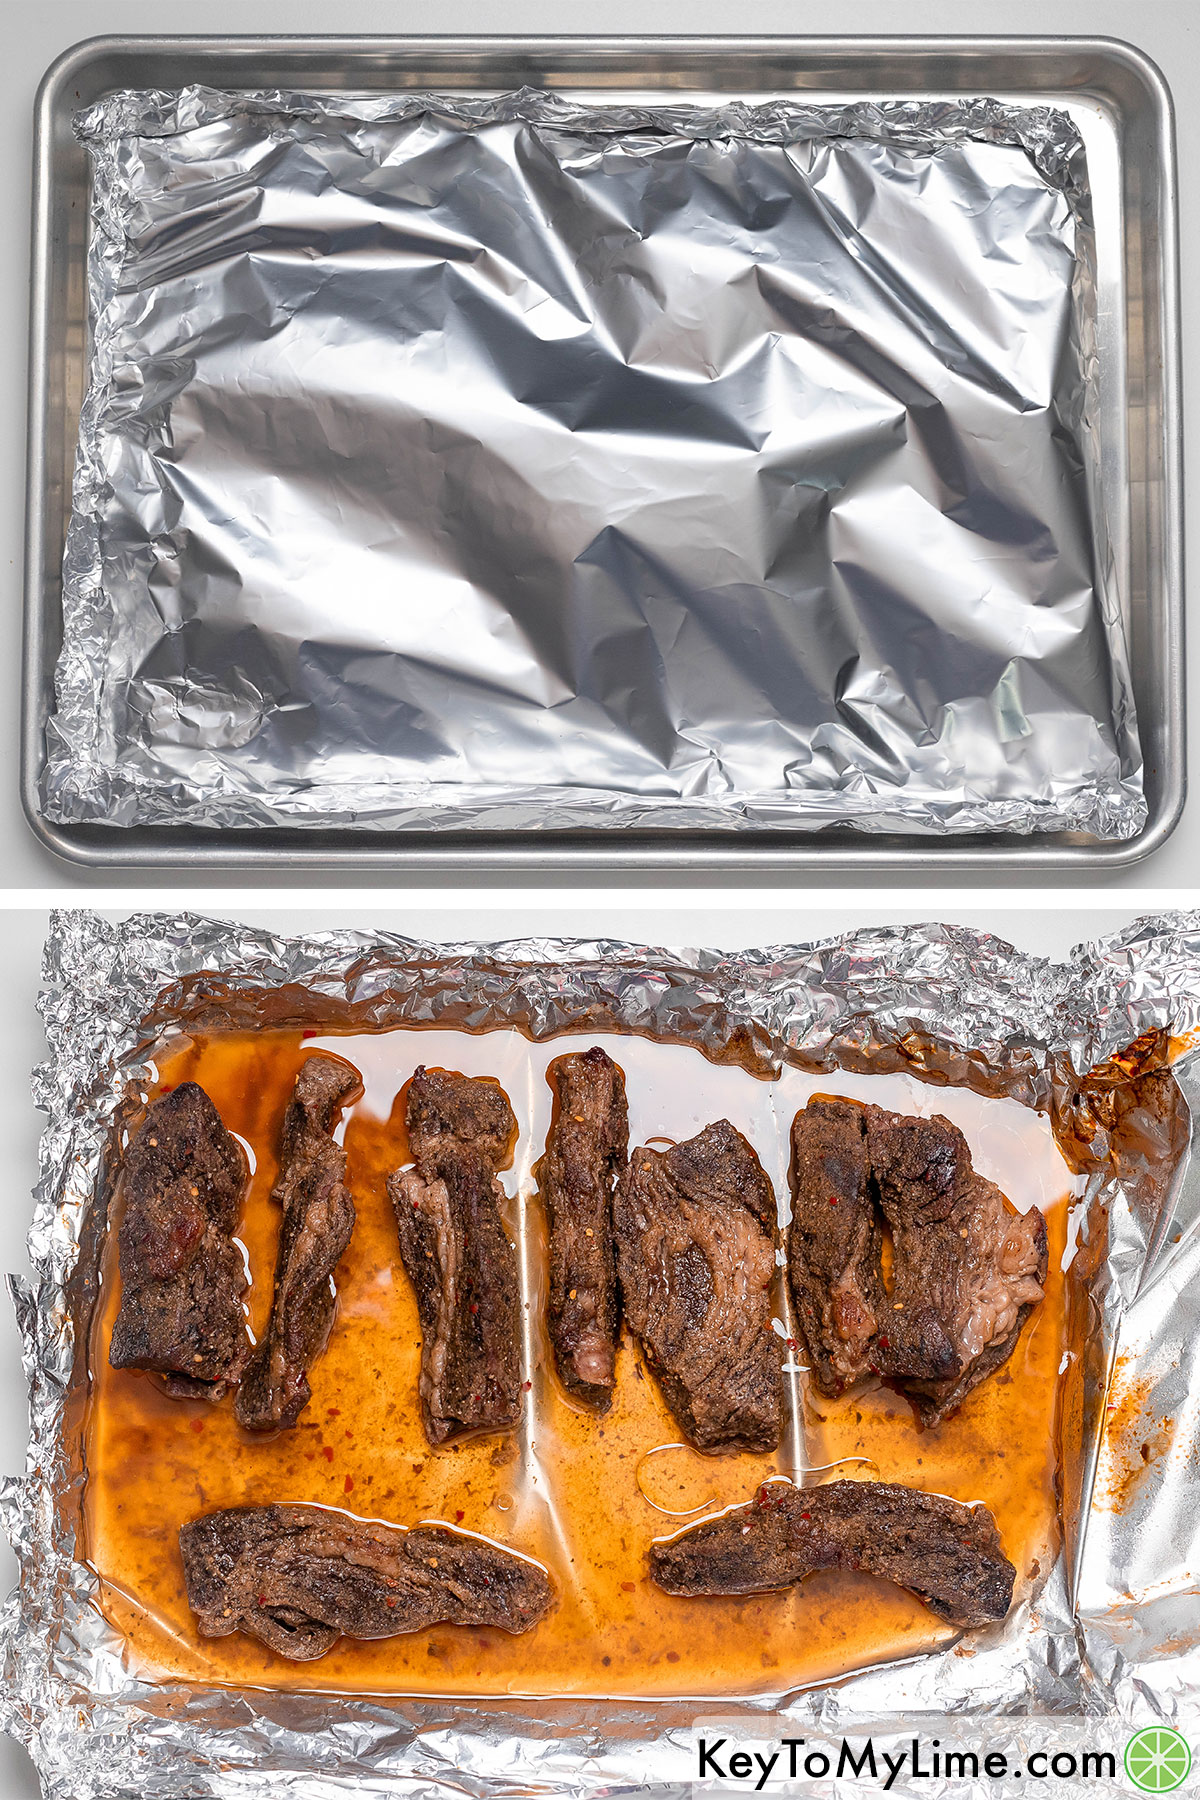 Placing aluminum foil tight over the ribs, and then baking in an oven until tender.